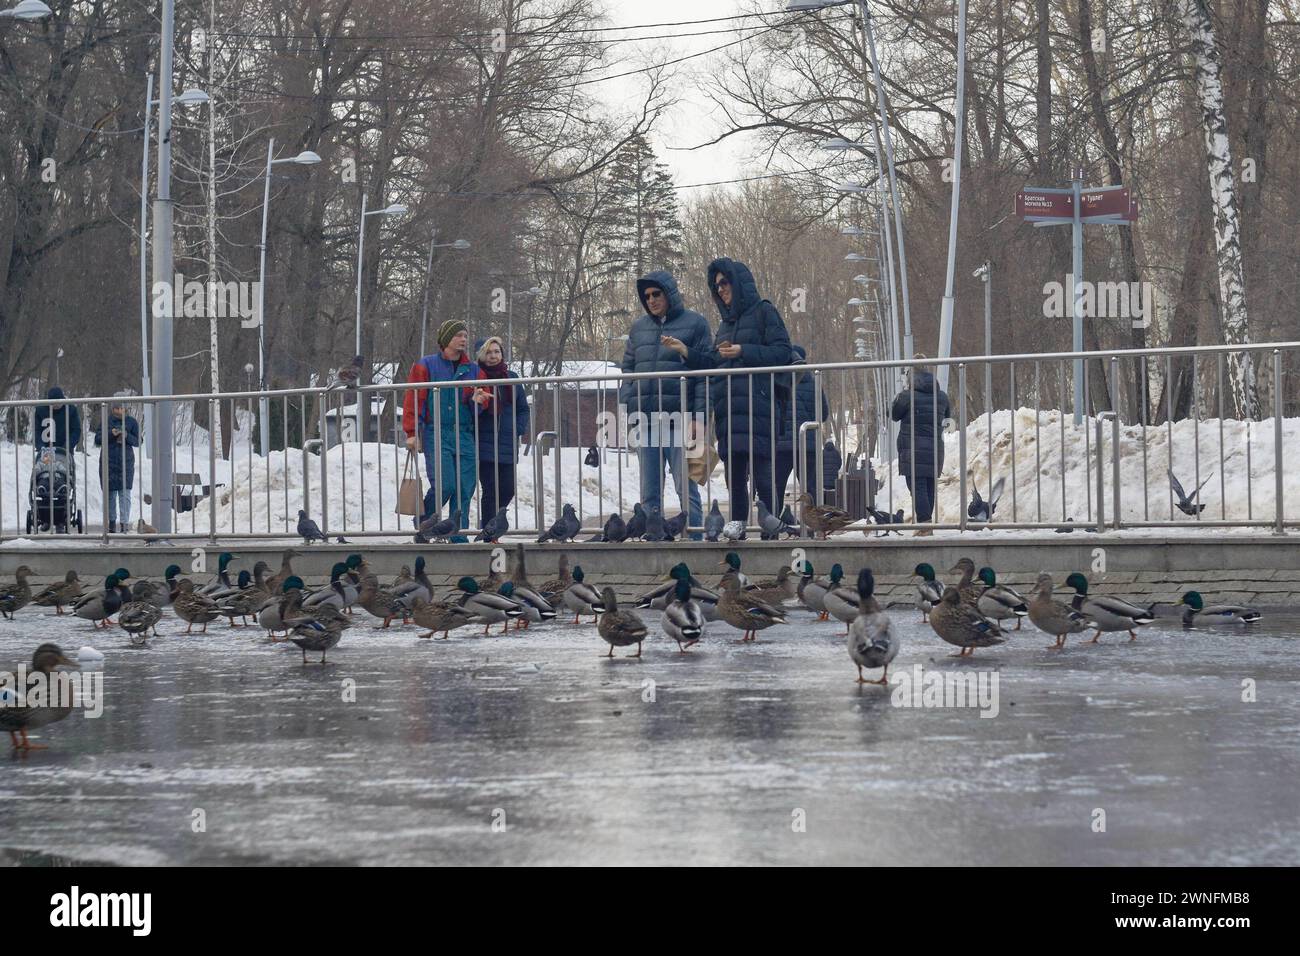 Passers-by feed ducks at the Dynamo central park. At the end of February - beginning of March, spring warmth came to the million-plus city of Central Russia, Voronezh. Slush and puddles did not prevent Voronezh residents from seeing election campaign signs on street boards. The presidential elections in the Russian Federation are scheduled for March 17. Four candidates are participating in the elections, three of whom fully support the policies of the current president, Vladimir Putin. And the fourth is the current president. The Central Election Commission did not allow anti-war candidates to Stock Photo